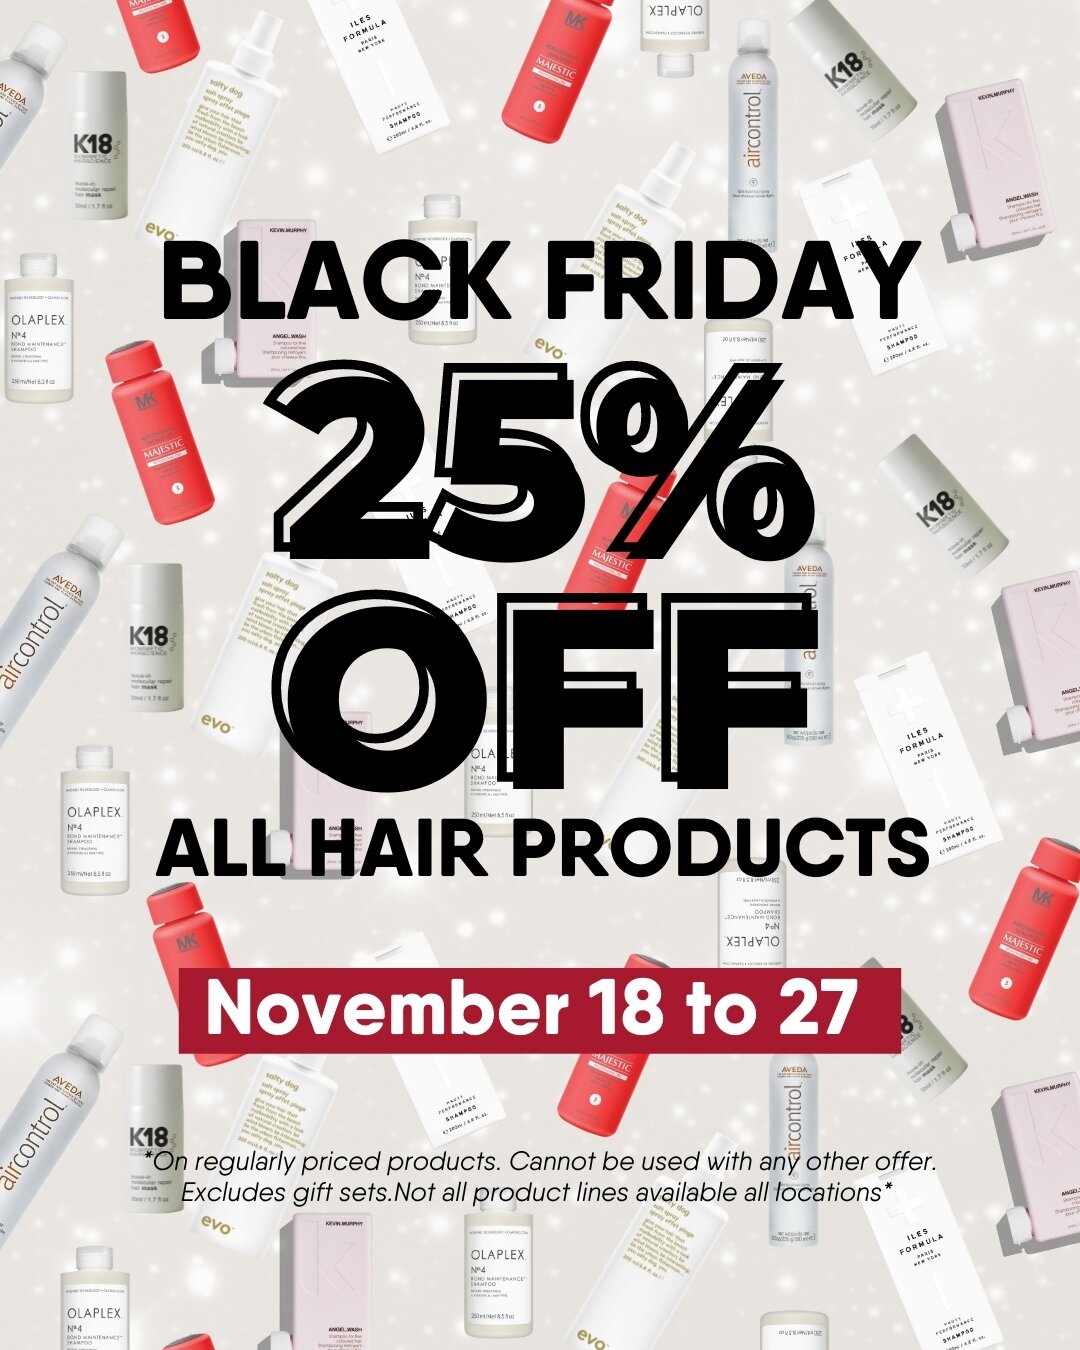 🧨 Our Black Friday sale starts tomorrow! 🖤 ⁠
⁠
It's your chance to grab your favorite brands* at 25% OFF, like Aveda, Evo, Olaplex, K18, MK Professional, and Iles Formula at amazing prices.⁠
⁠
Whether you're refreshing your own hair care collection